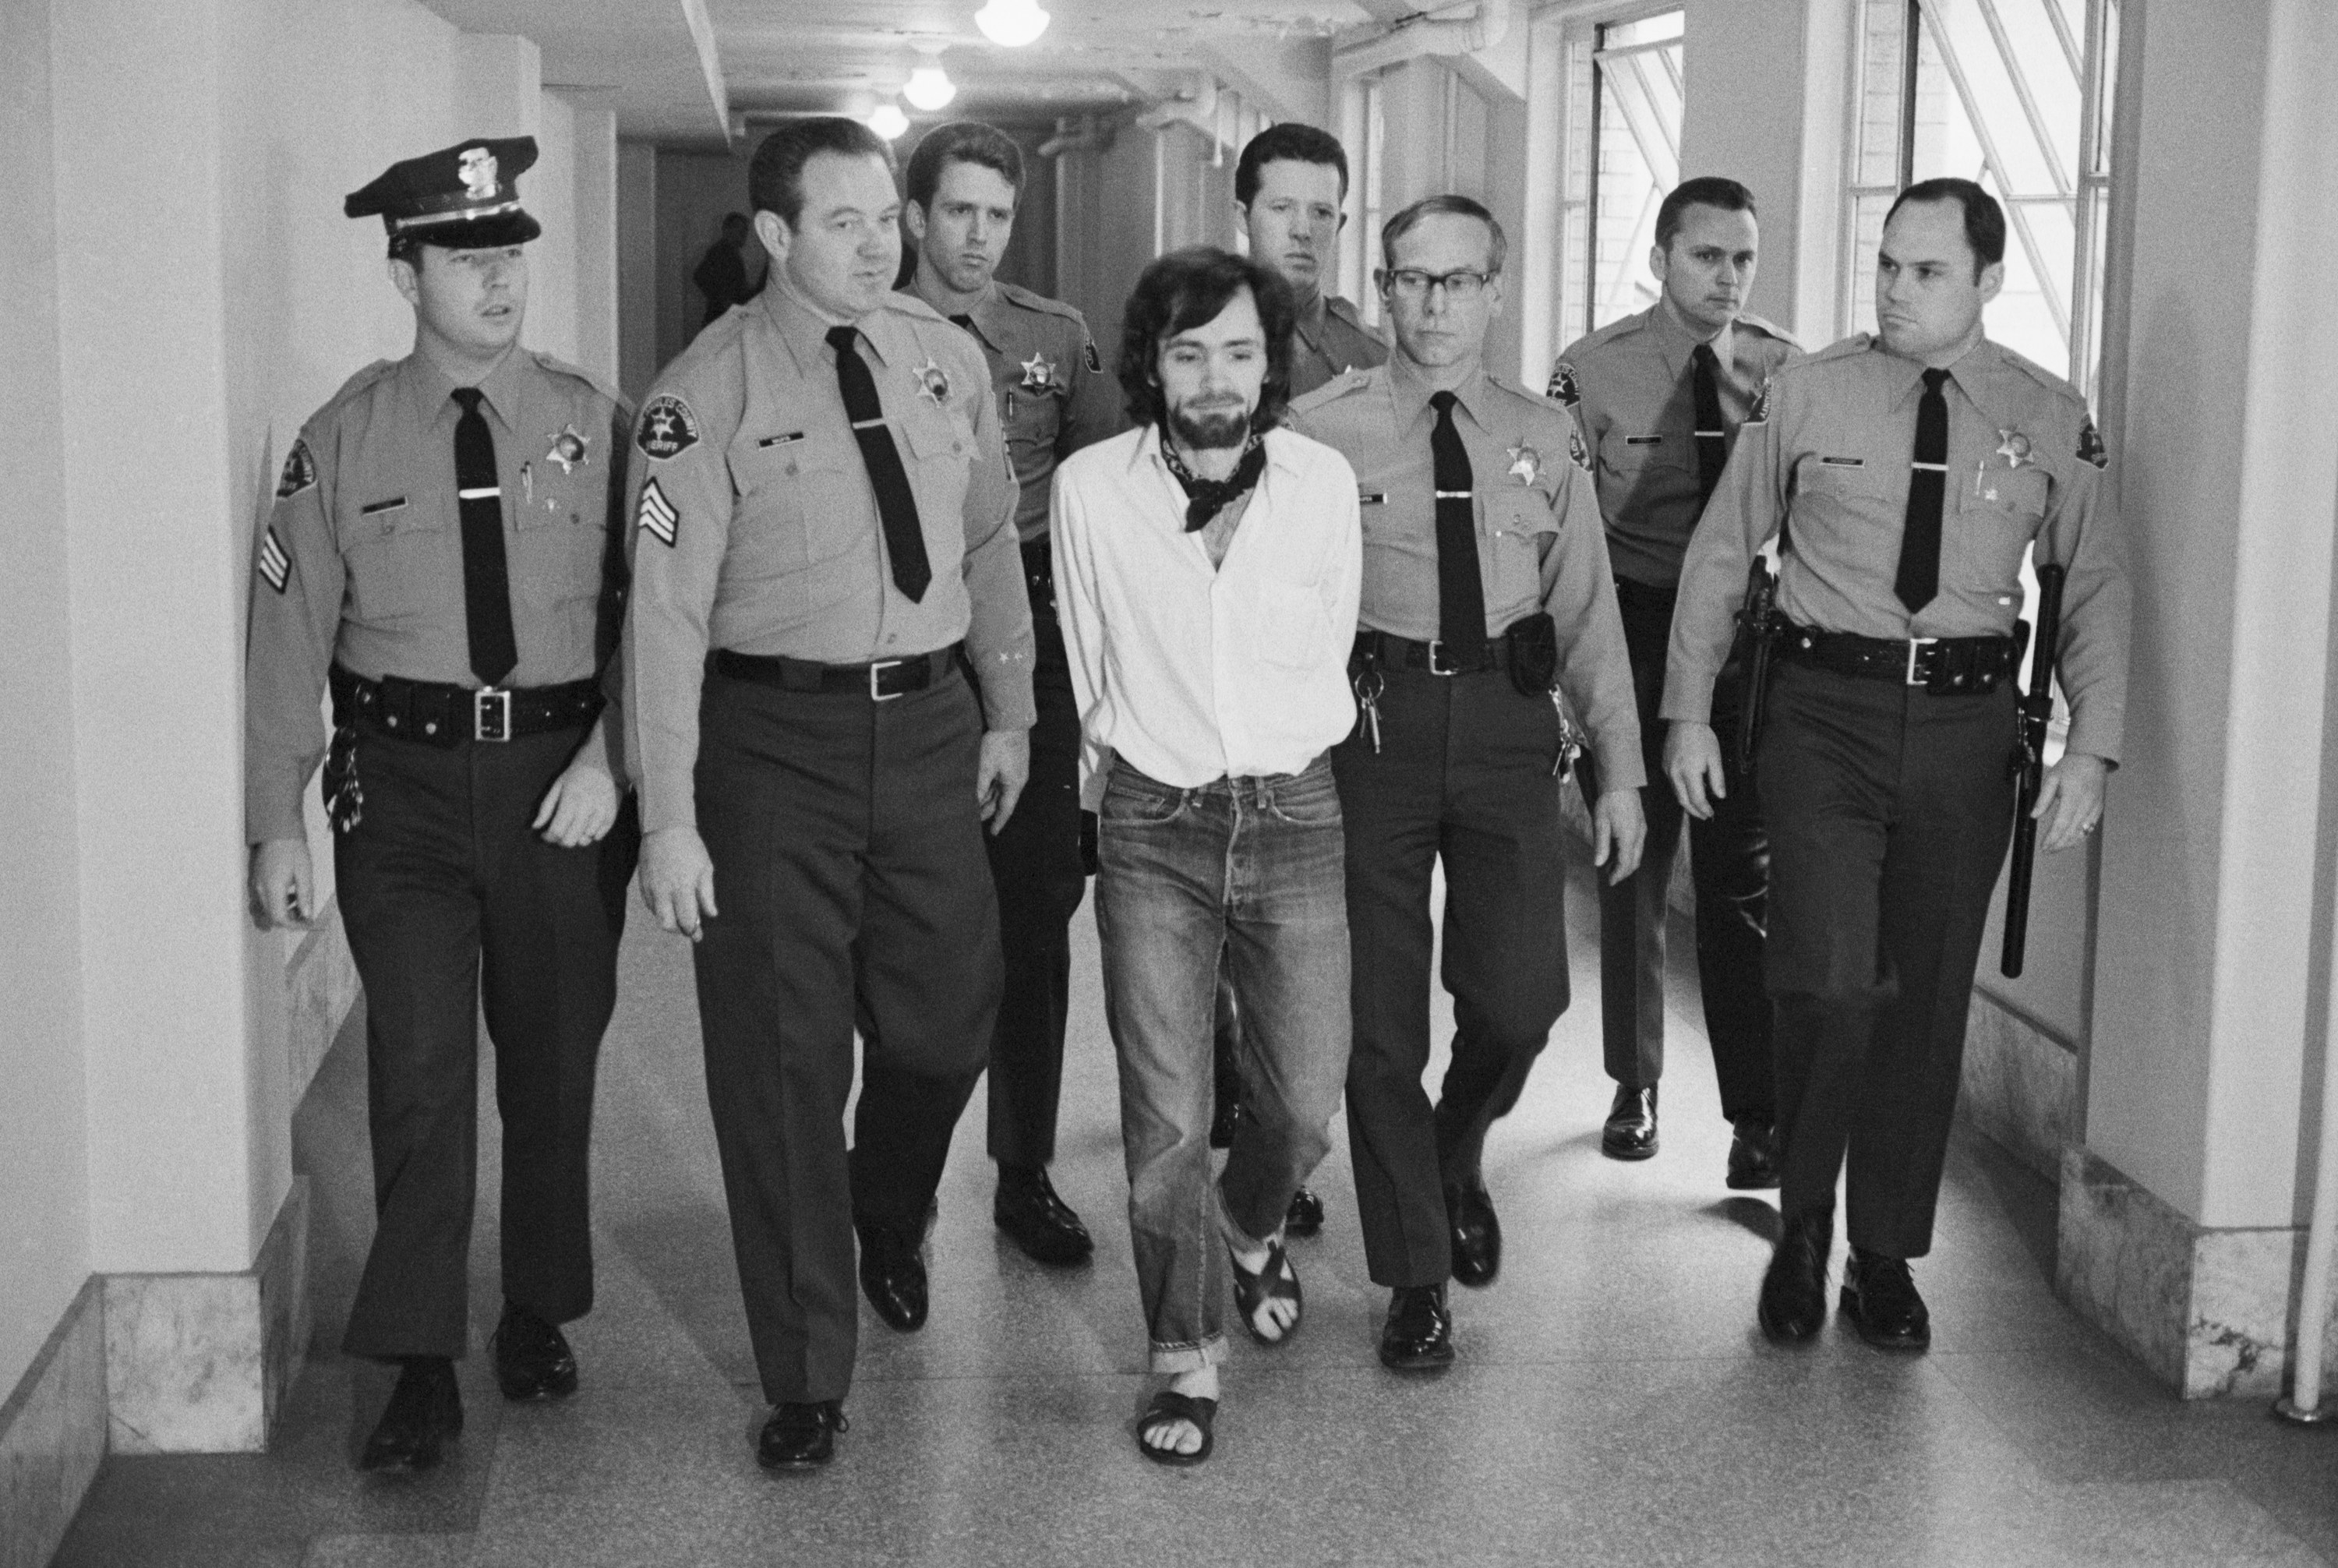 manson surrounded by police